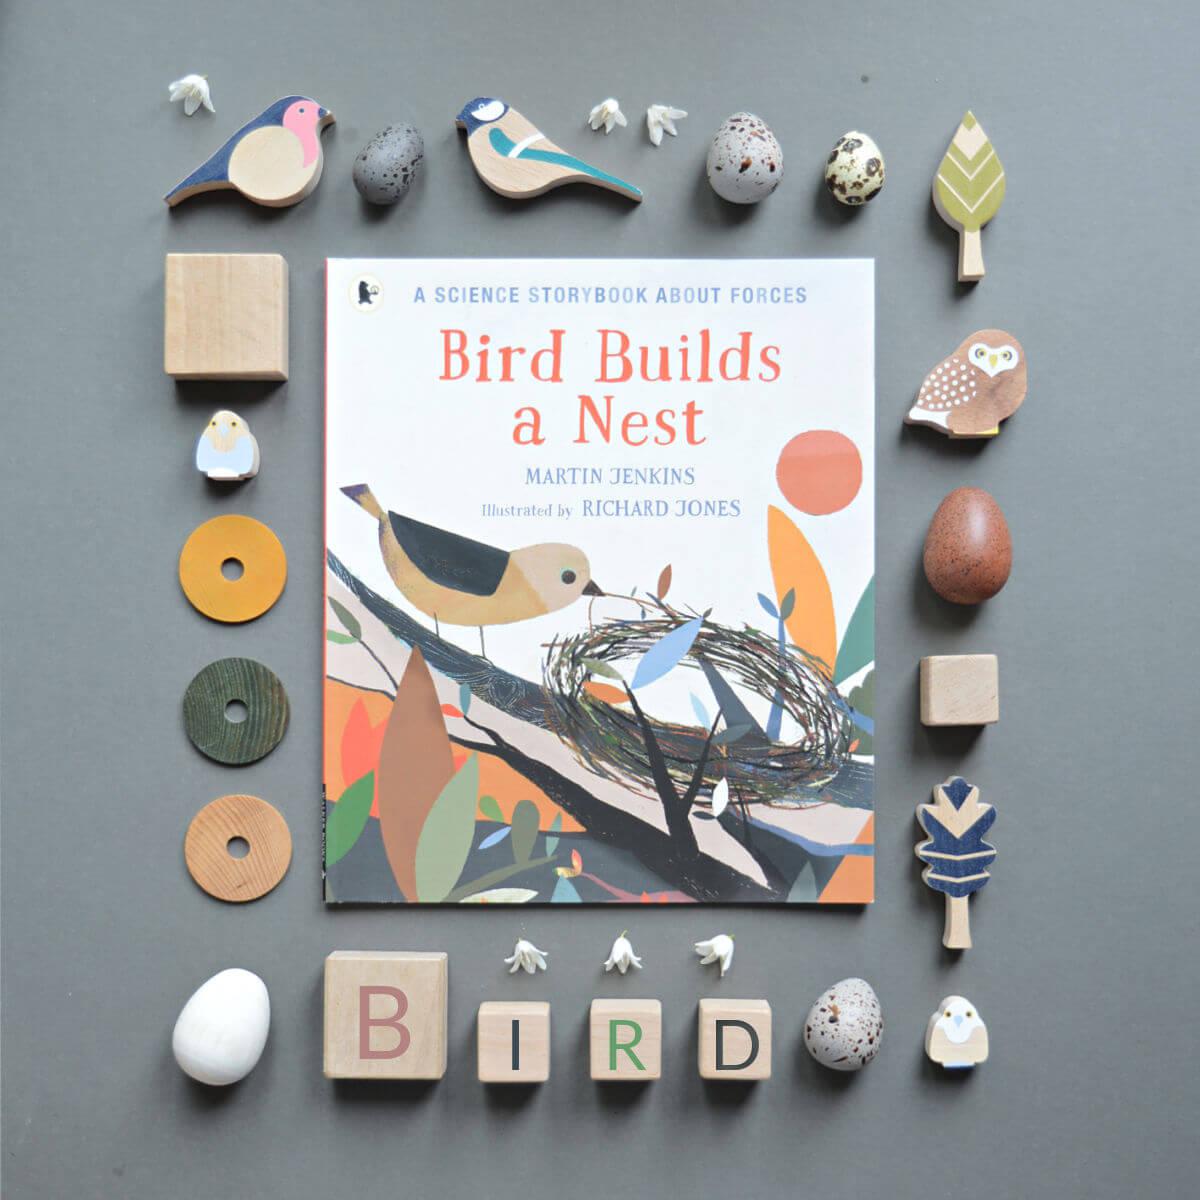 bird builds a nest children's science storybook about forces by martin jenkins illustrated by richard jones